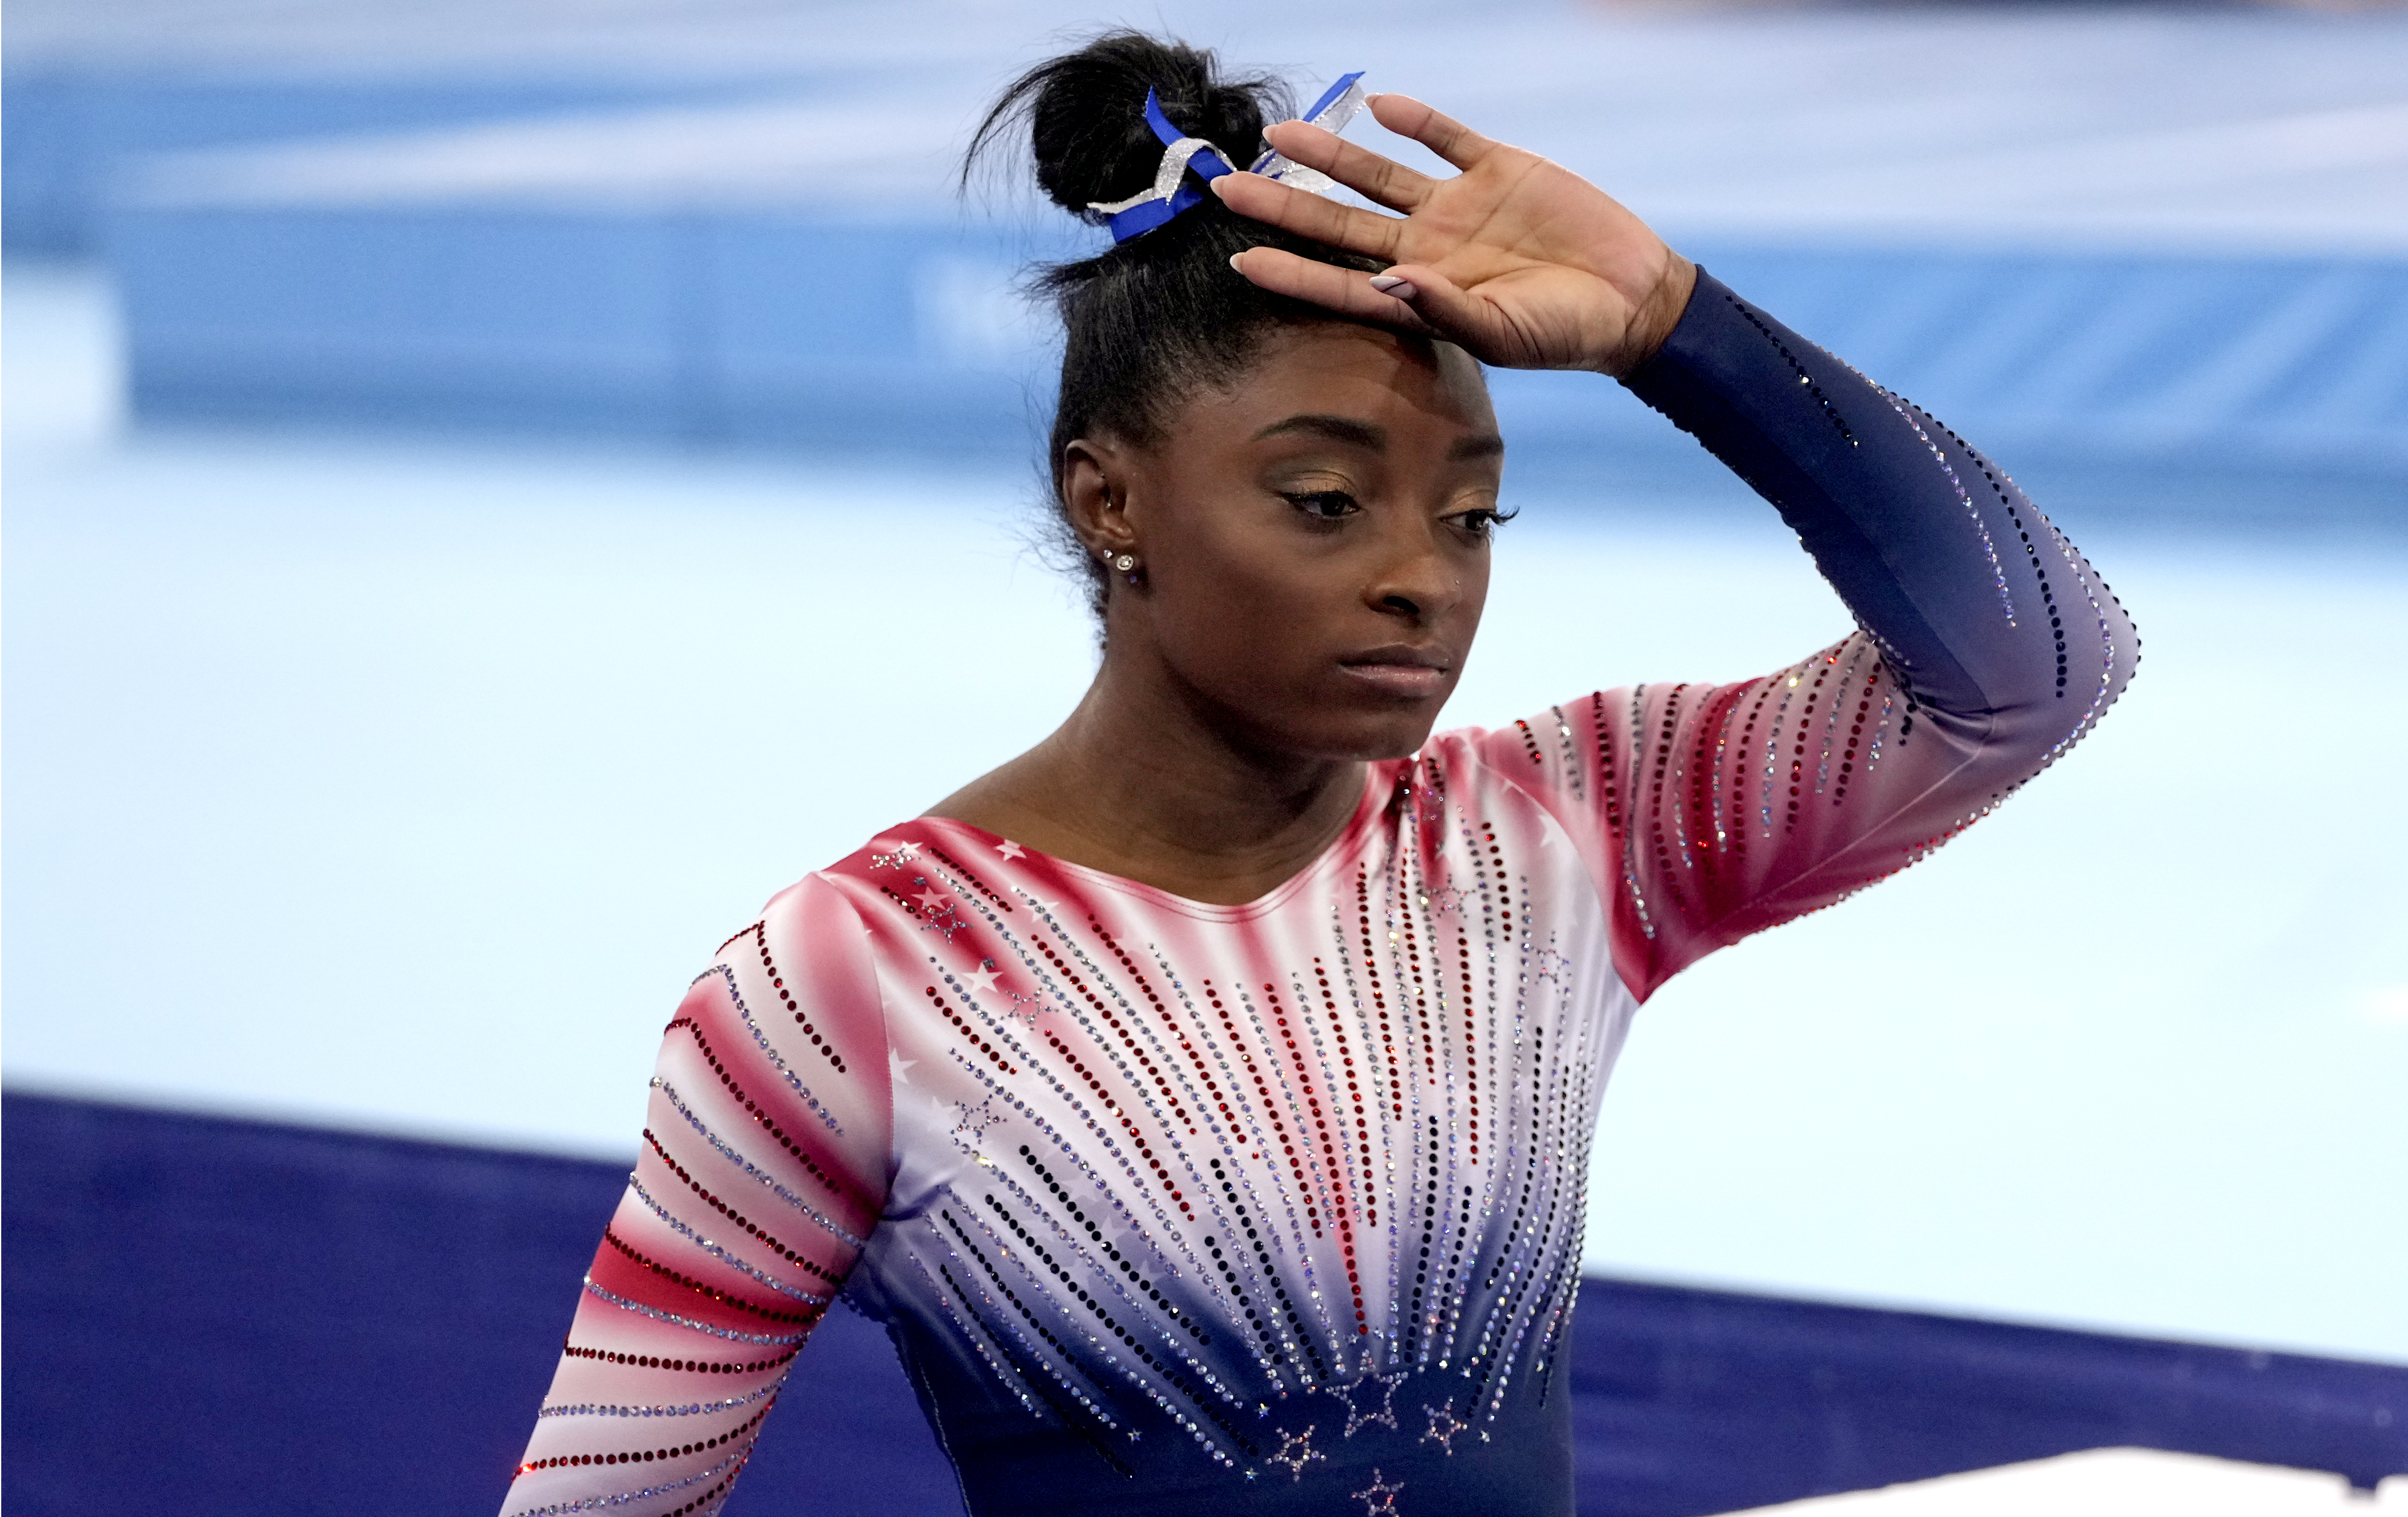 Simone Biles of Team United States getting ready to compete in the Tokyo 2020 Olympic Games Women's Gymnastics Balance Beam Final at Ariake Gymnastics Center on Tuesday, August 3, 2021 | Source: Getty Images